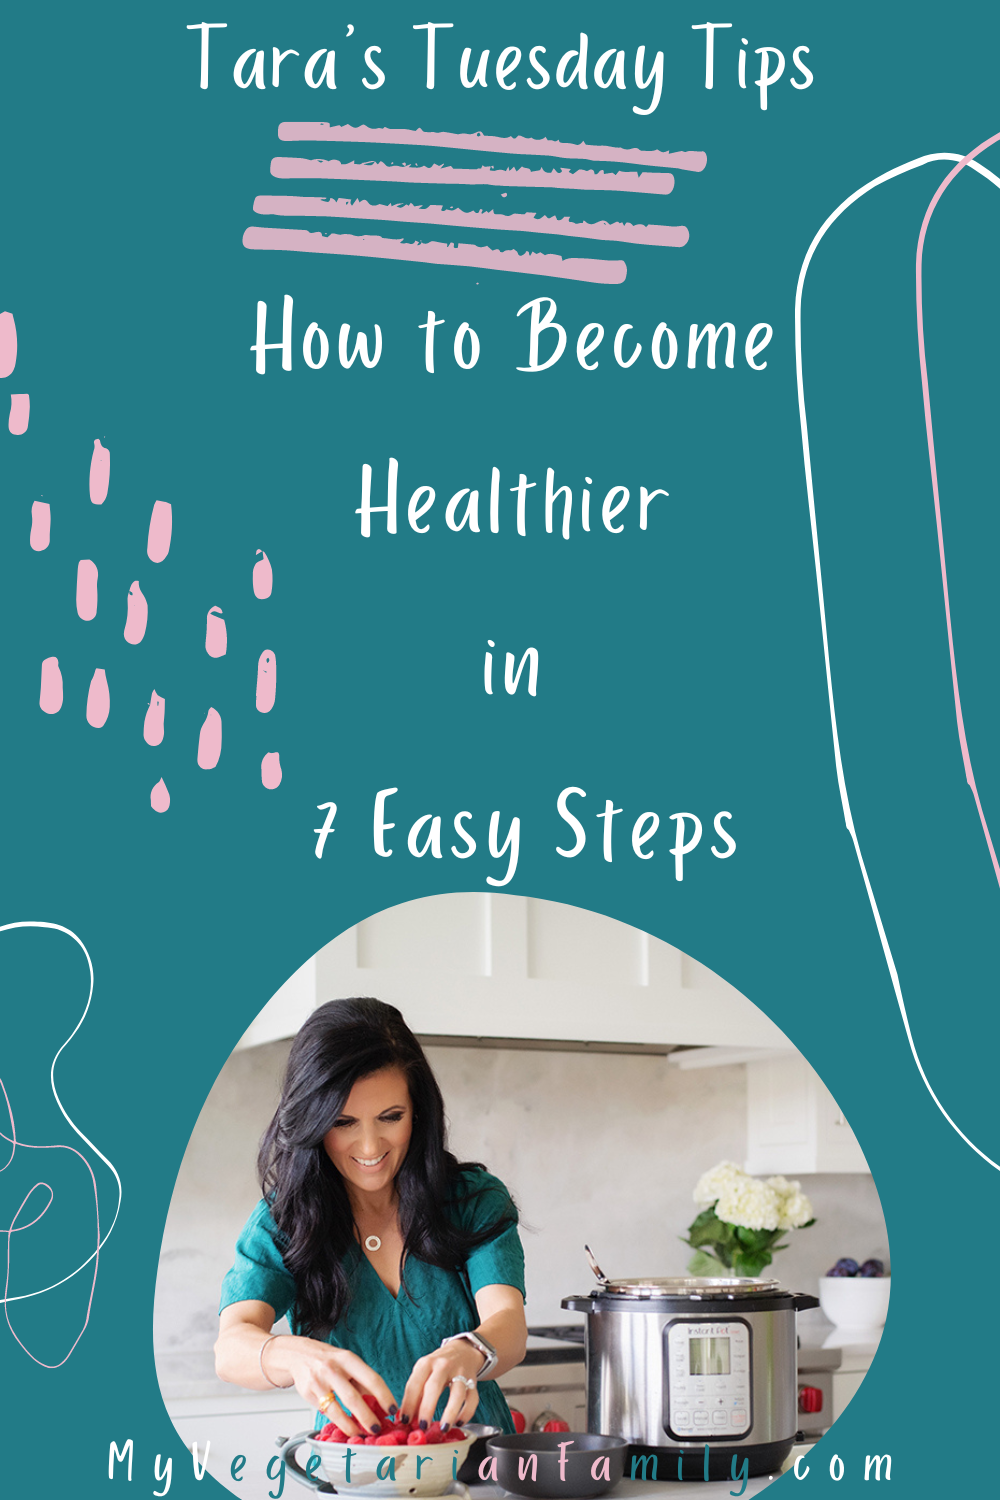 How to Become Healthier in 7 Easy Steps | Tara's Tuesday Tips | My Vegetarian Family #stepstohealth